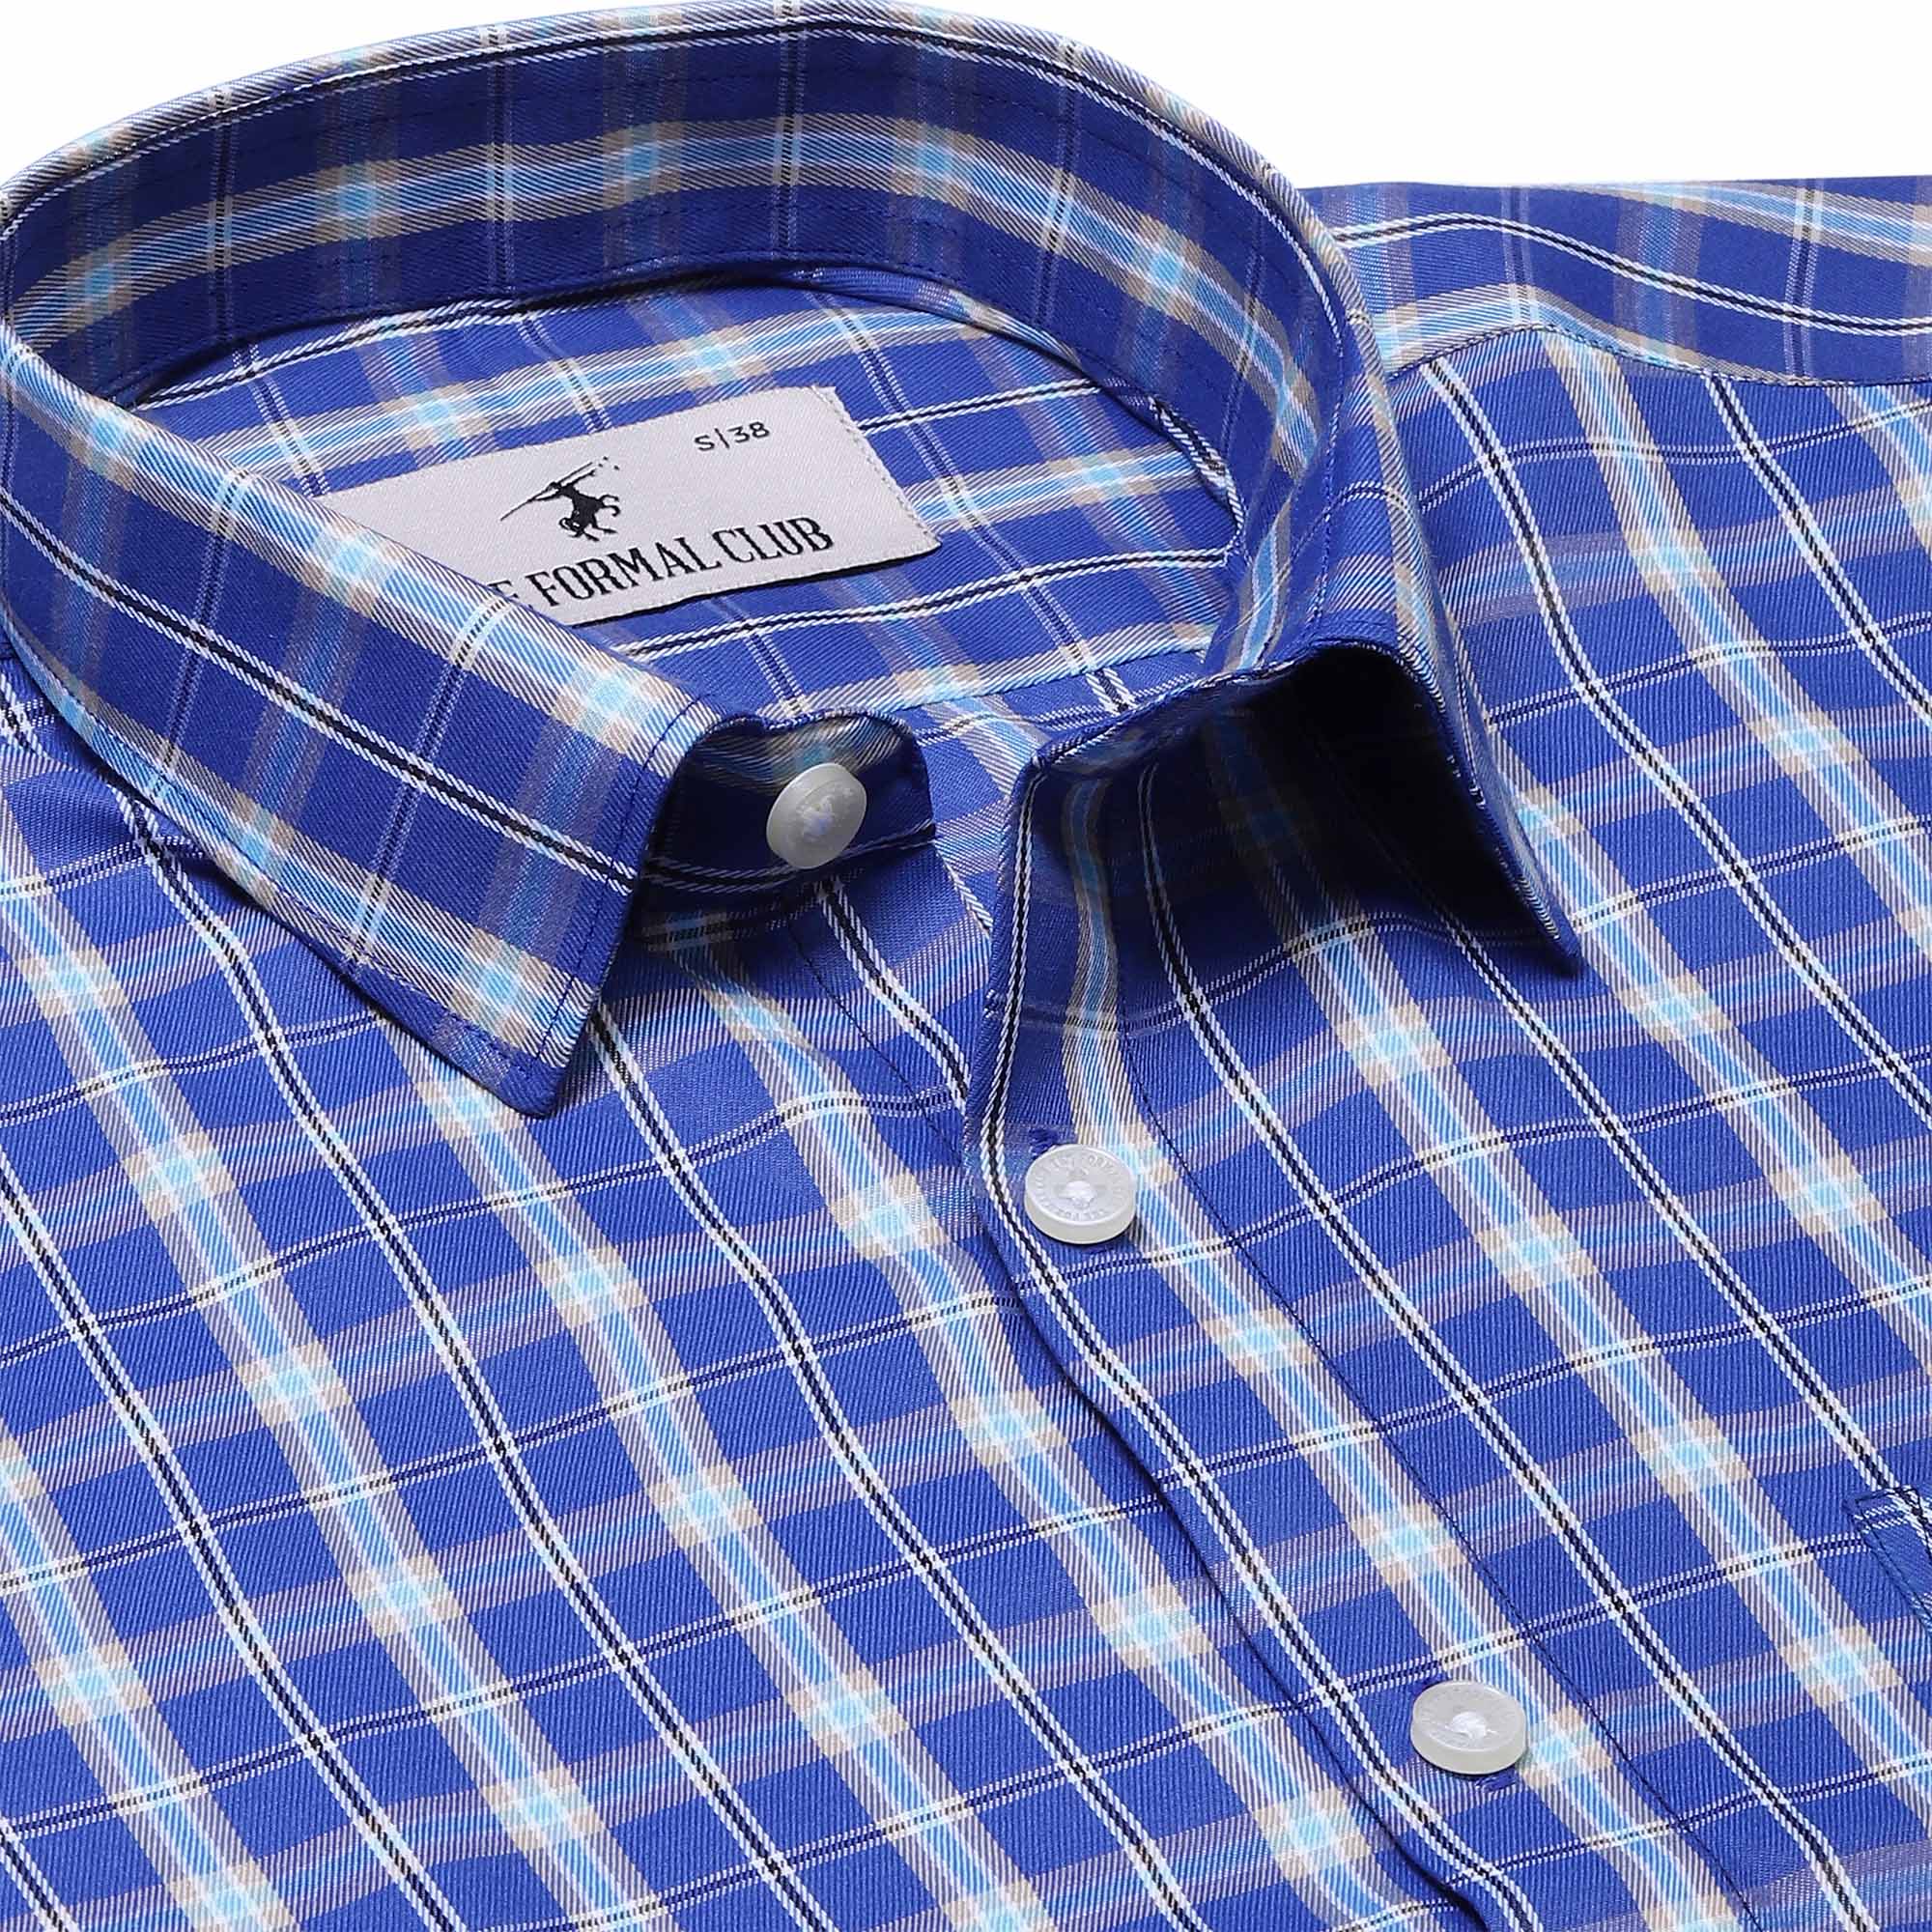 Vento Twill Check Shirt in Blue - The Formal Club